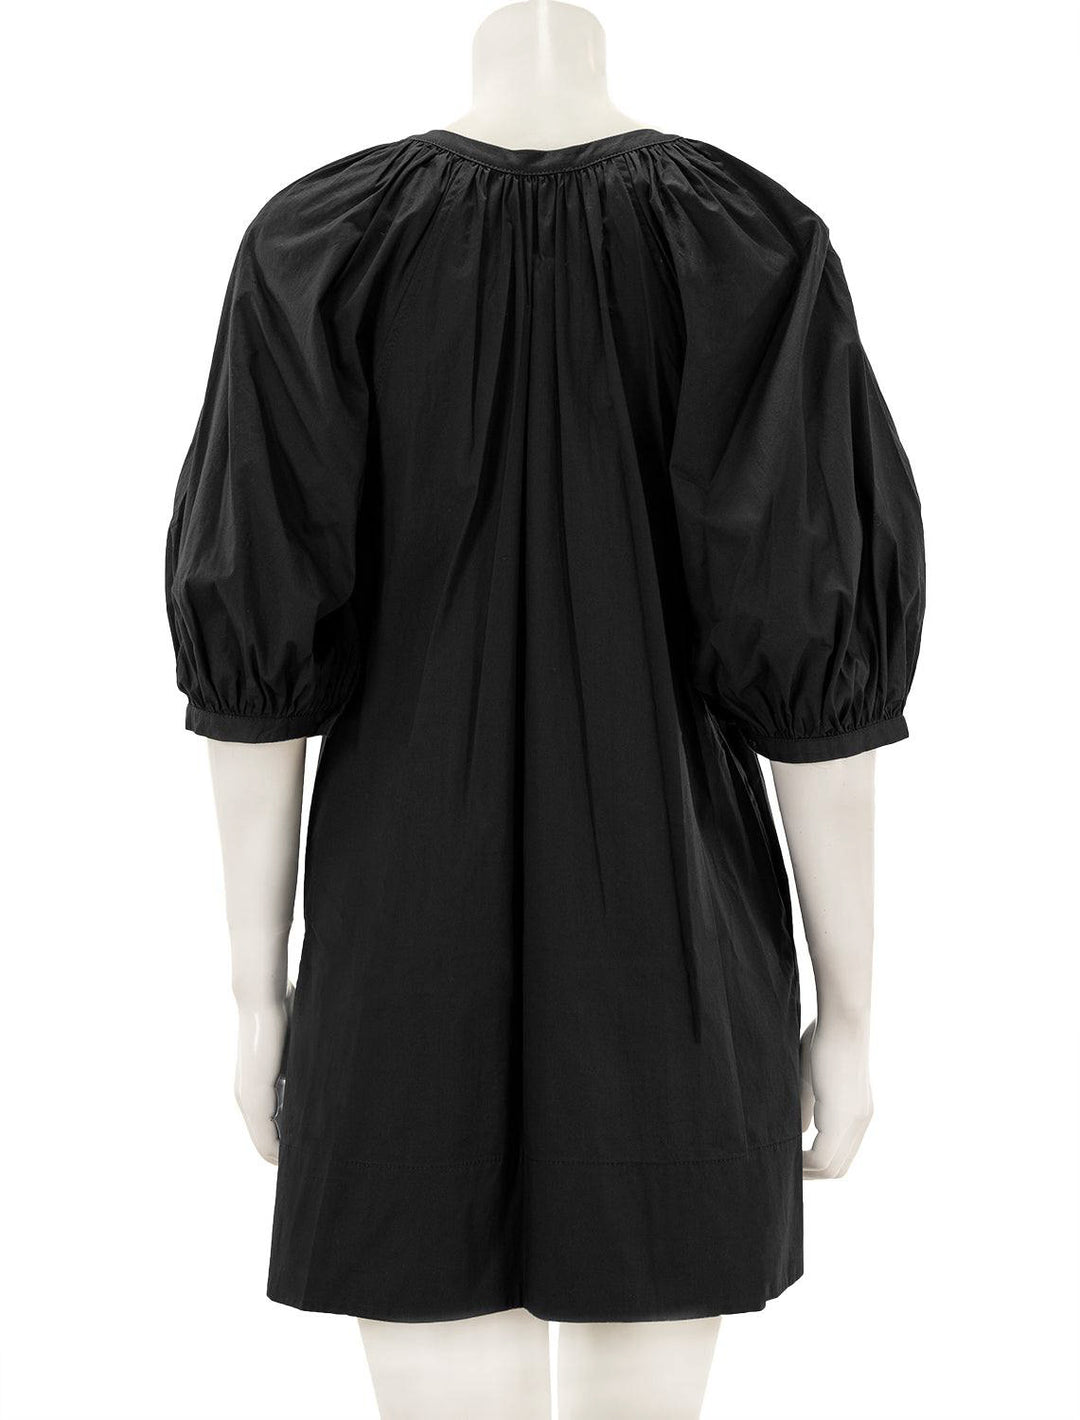 Back view of Staud's mini vincent dress in black.